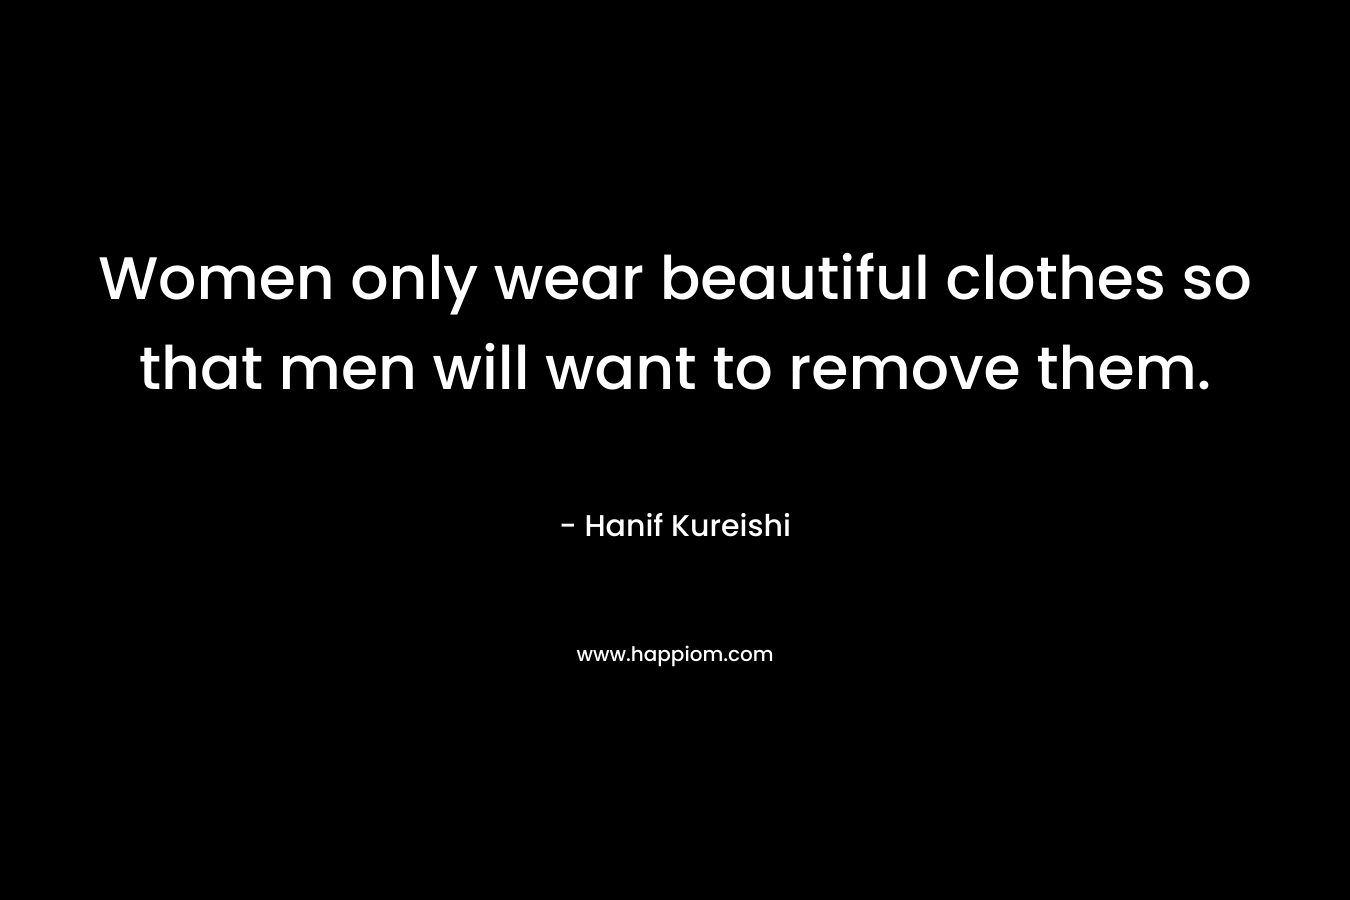 Women only wear beautiful clothes so that men will want to remove them. – Hanif Kureishi